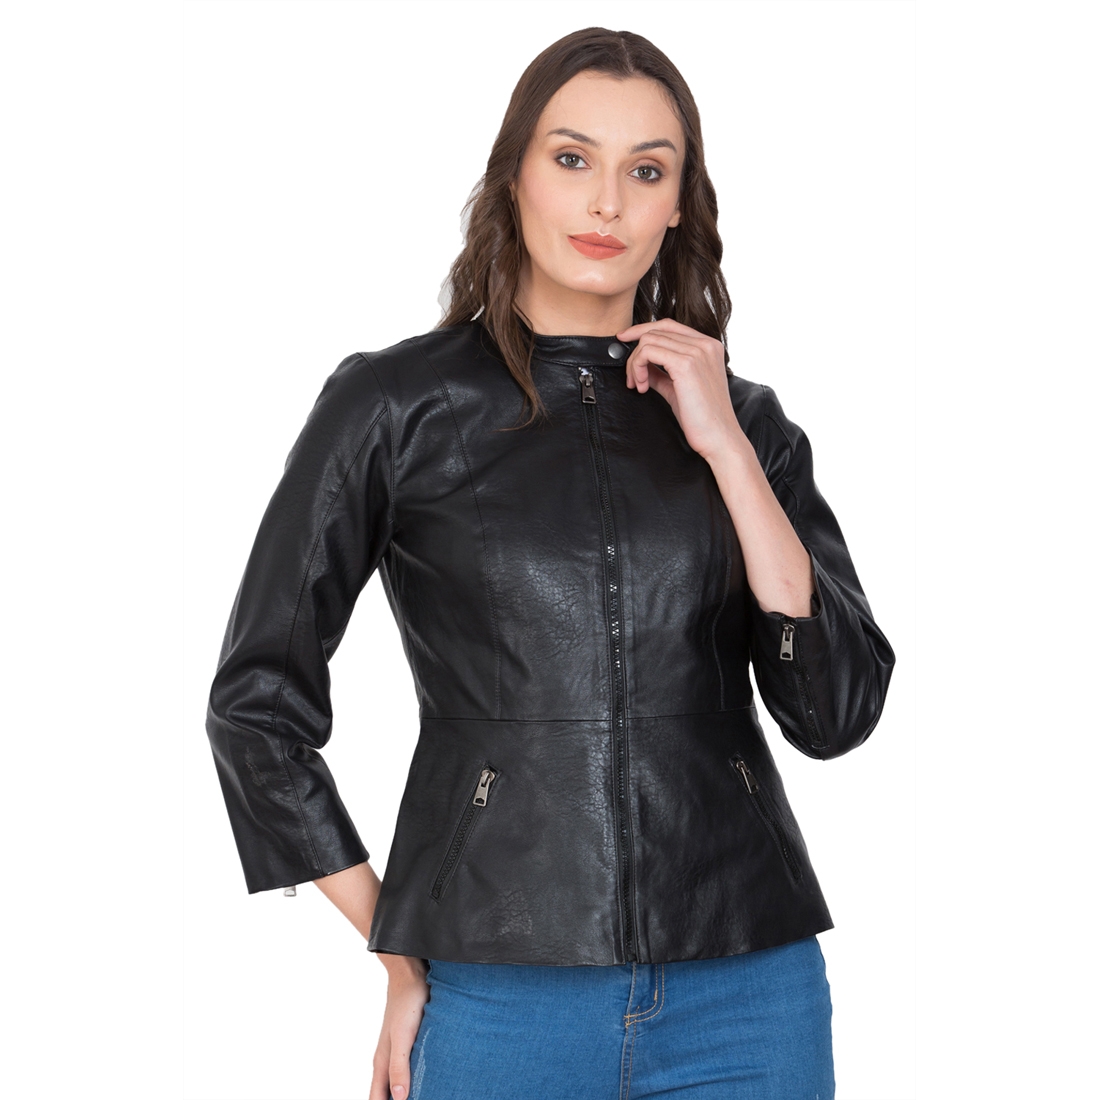 Justanned | JUSTANNED RAVEN WOMEN LEATHER JACKET 0